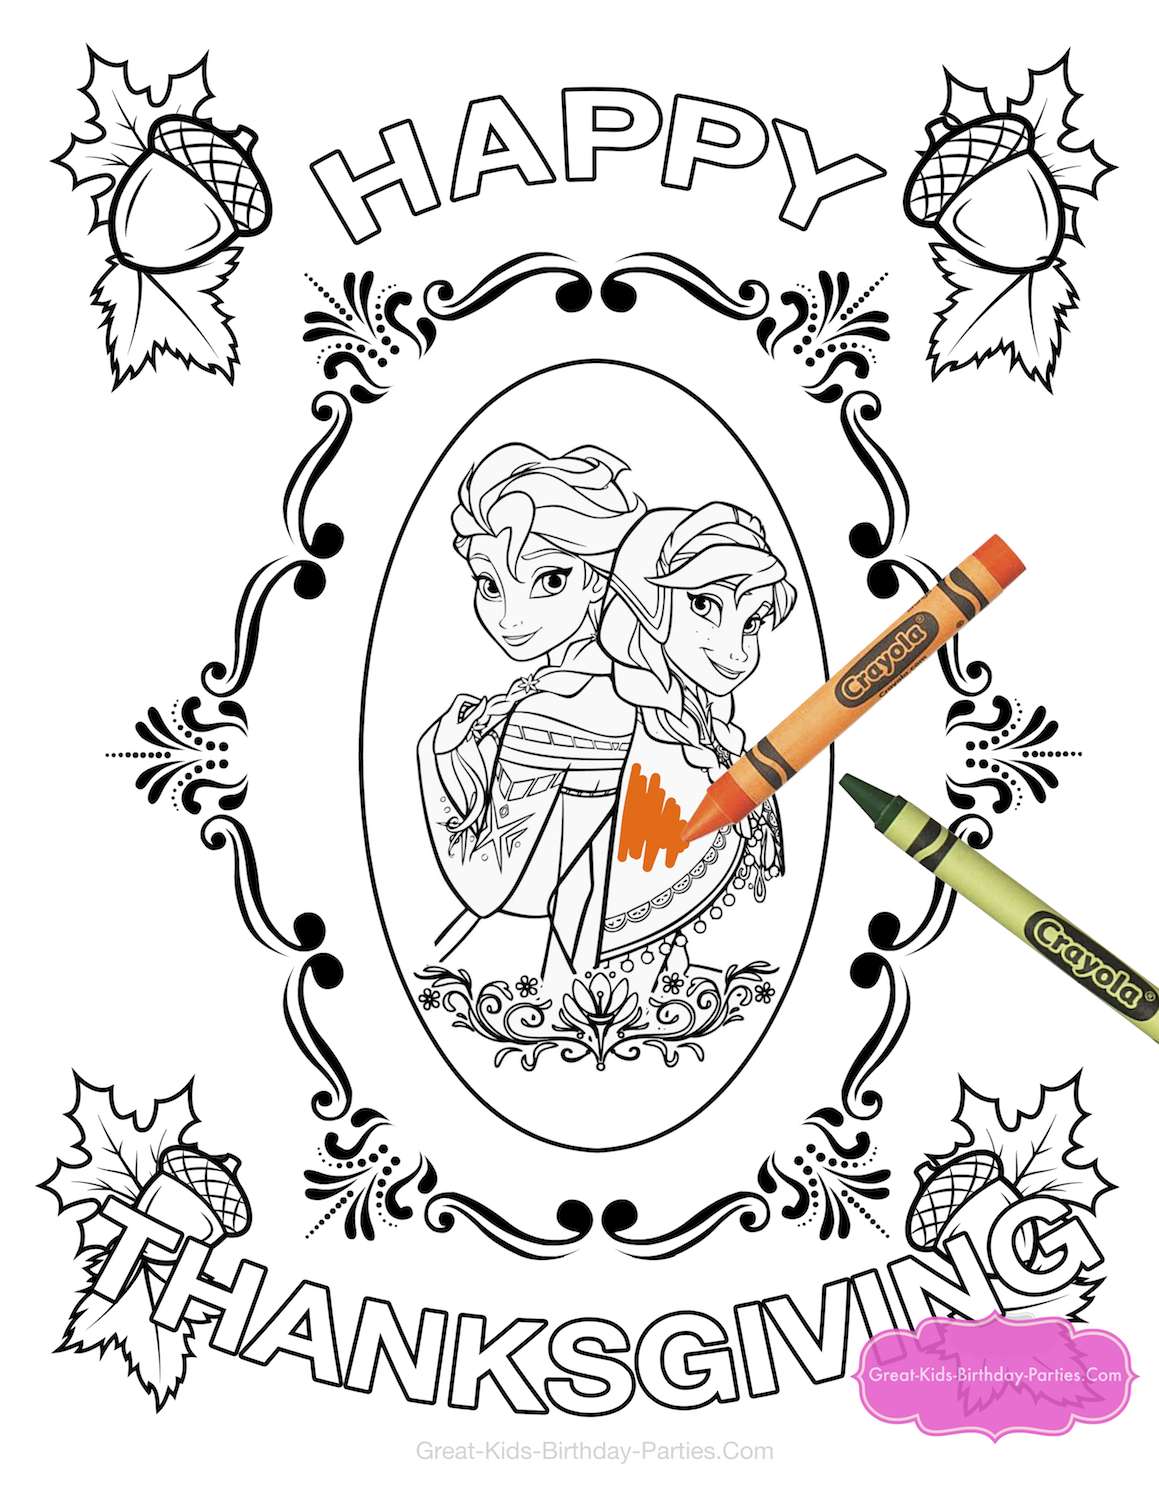 Frozen Thanksgiving coloring page